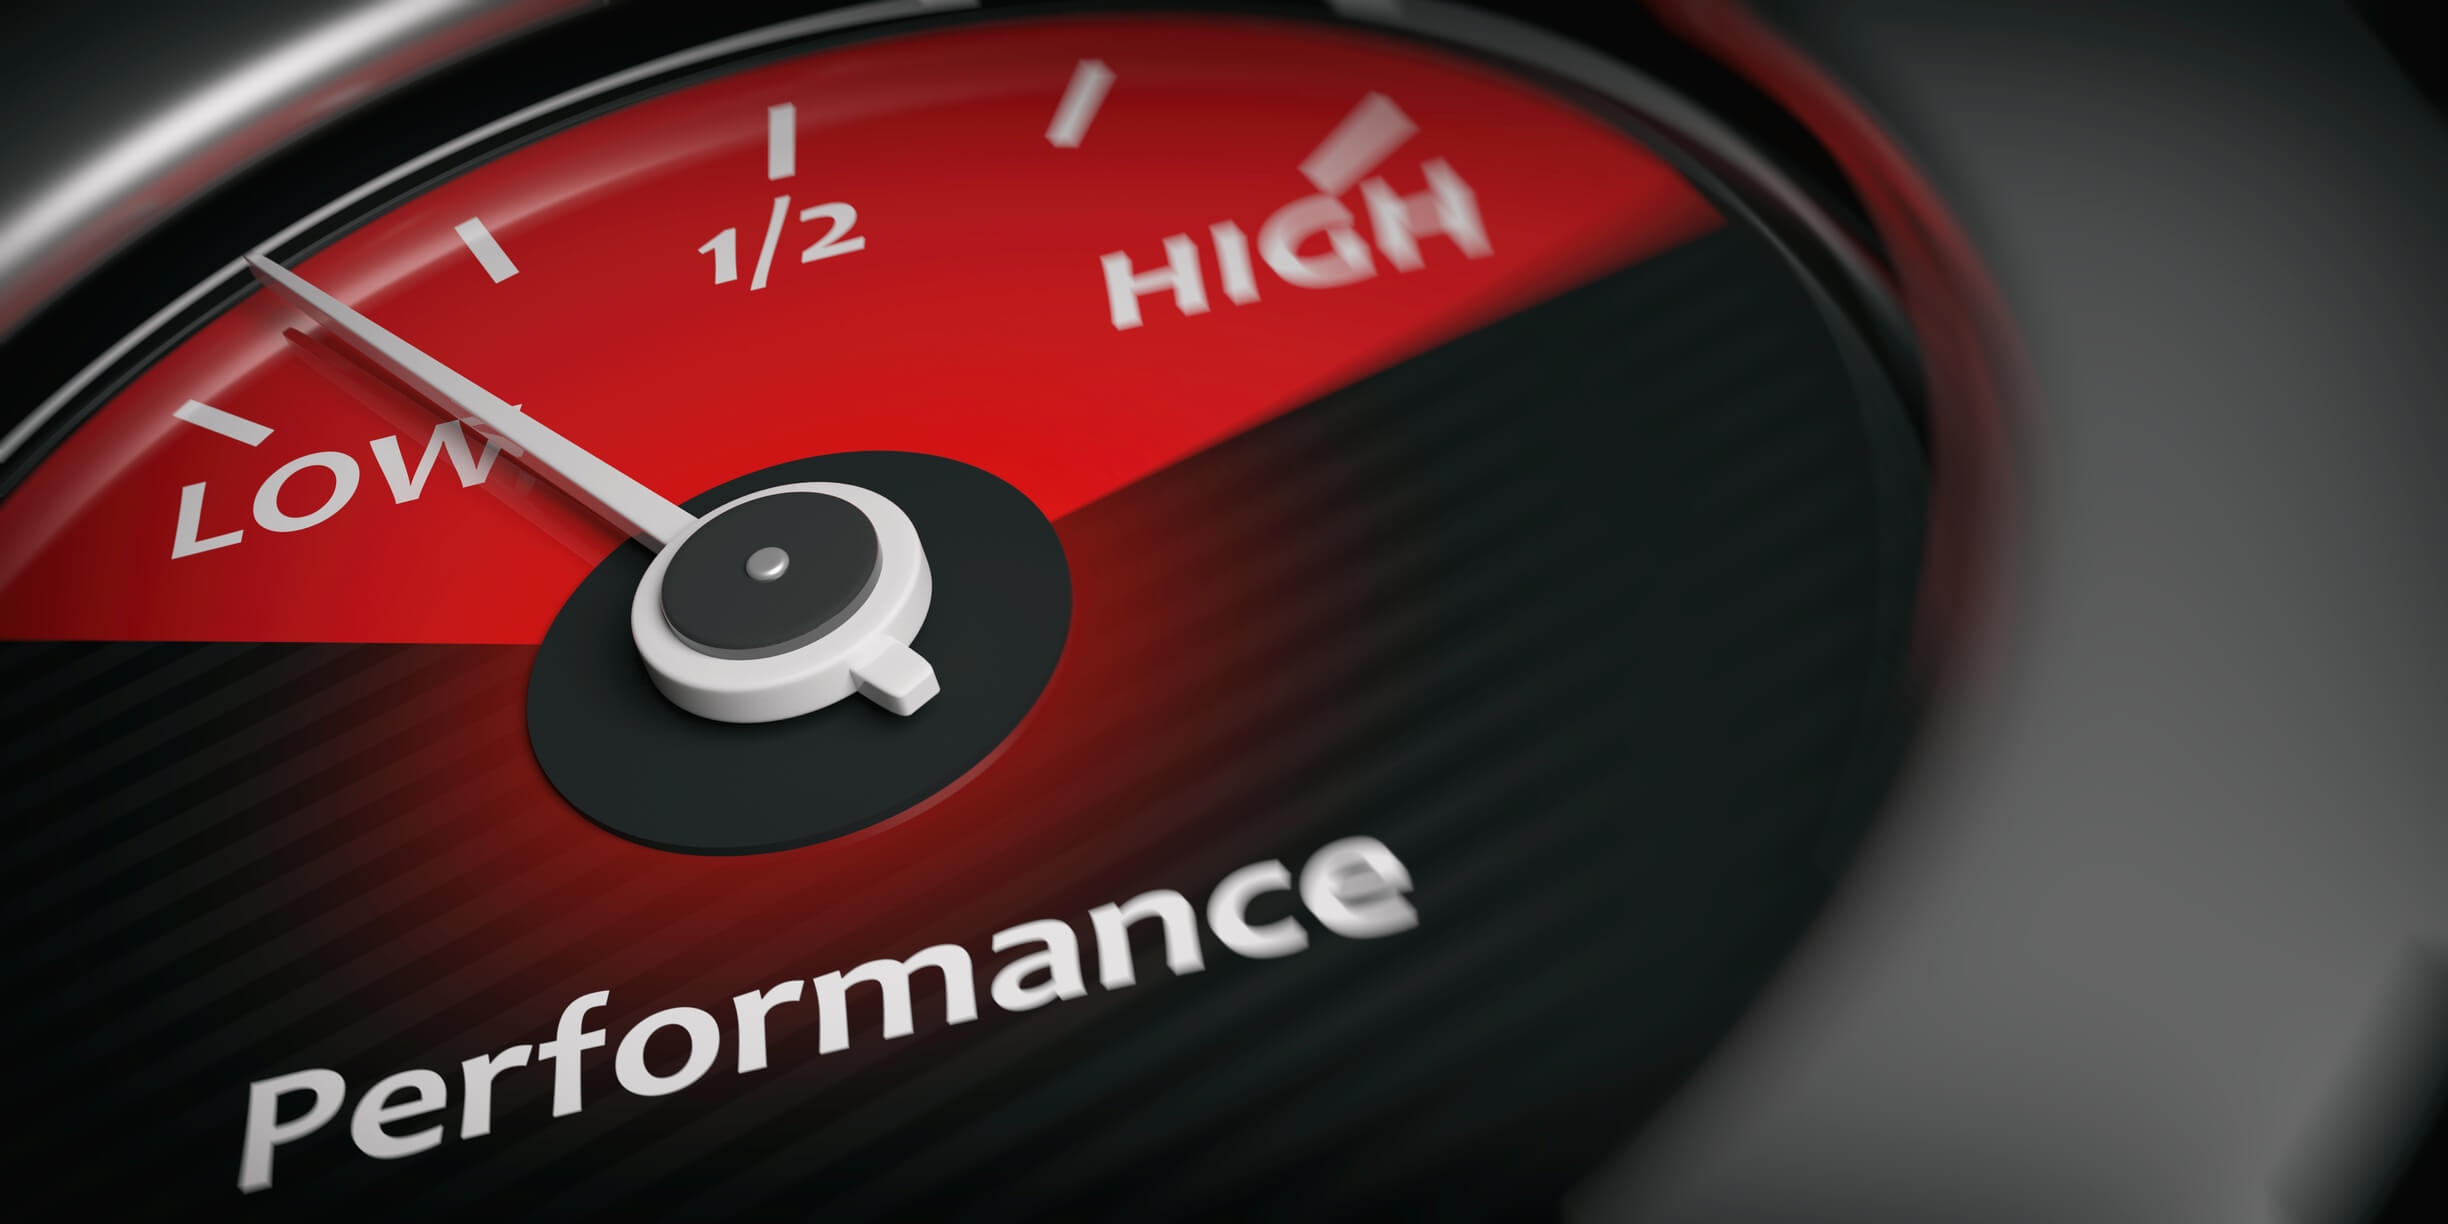 Low rating on performance meter